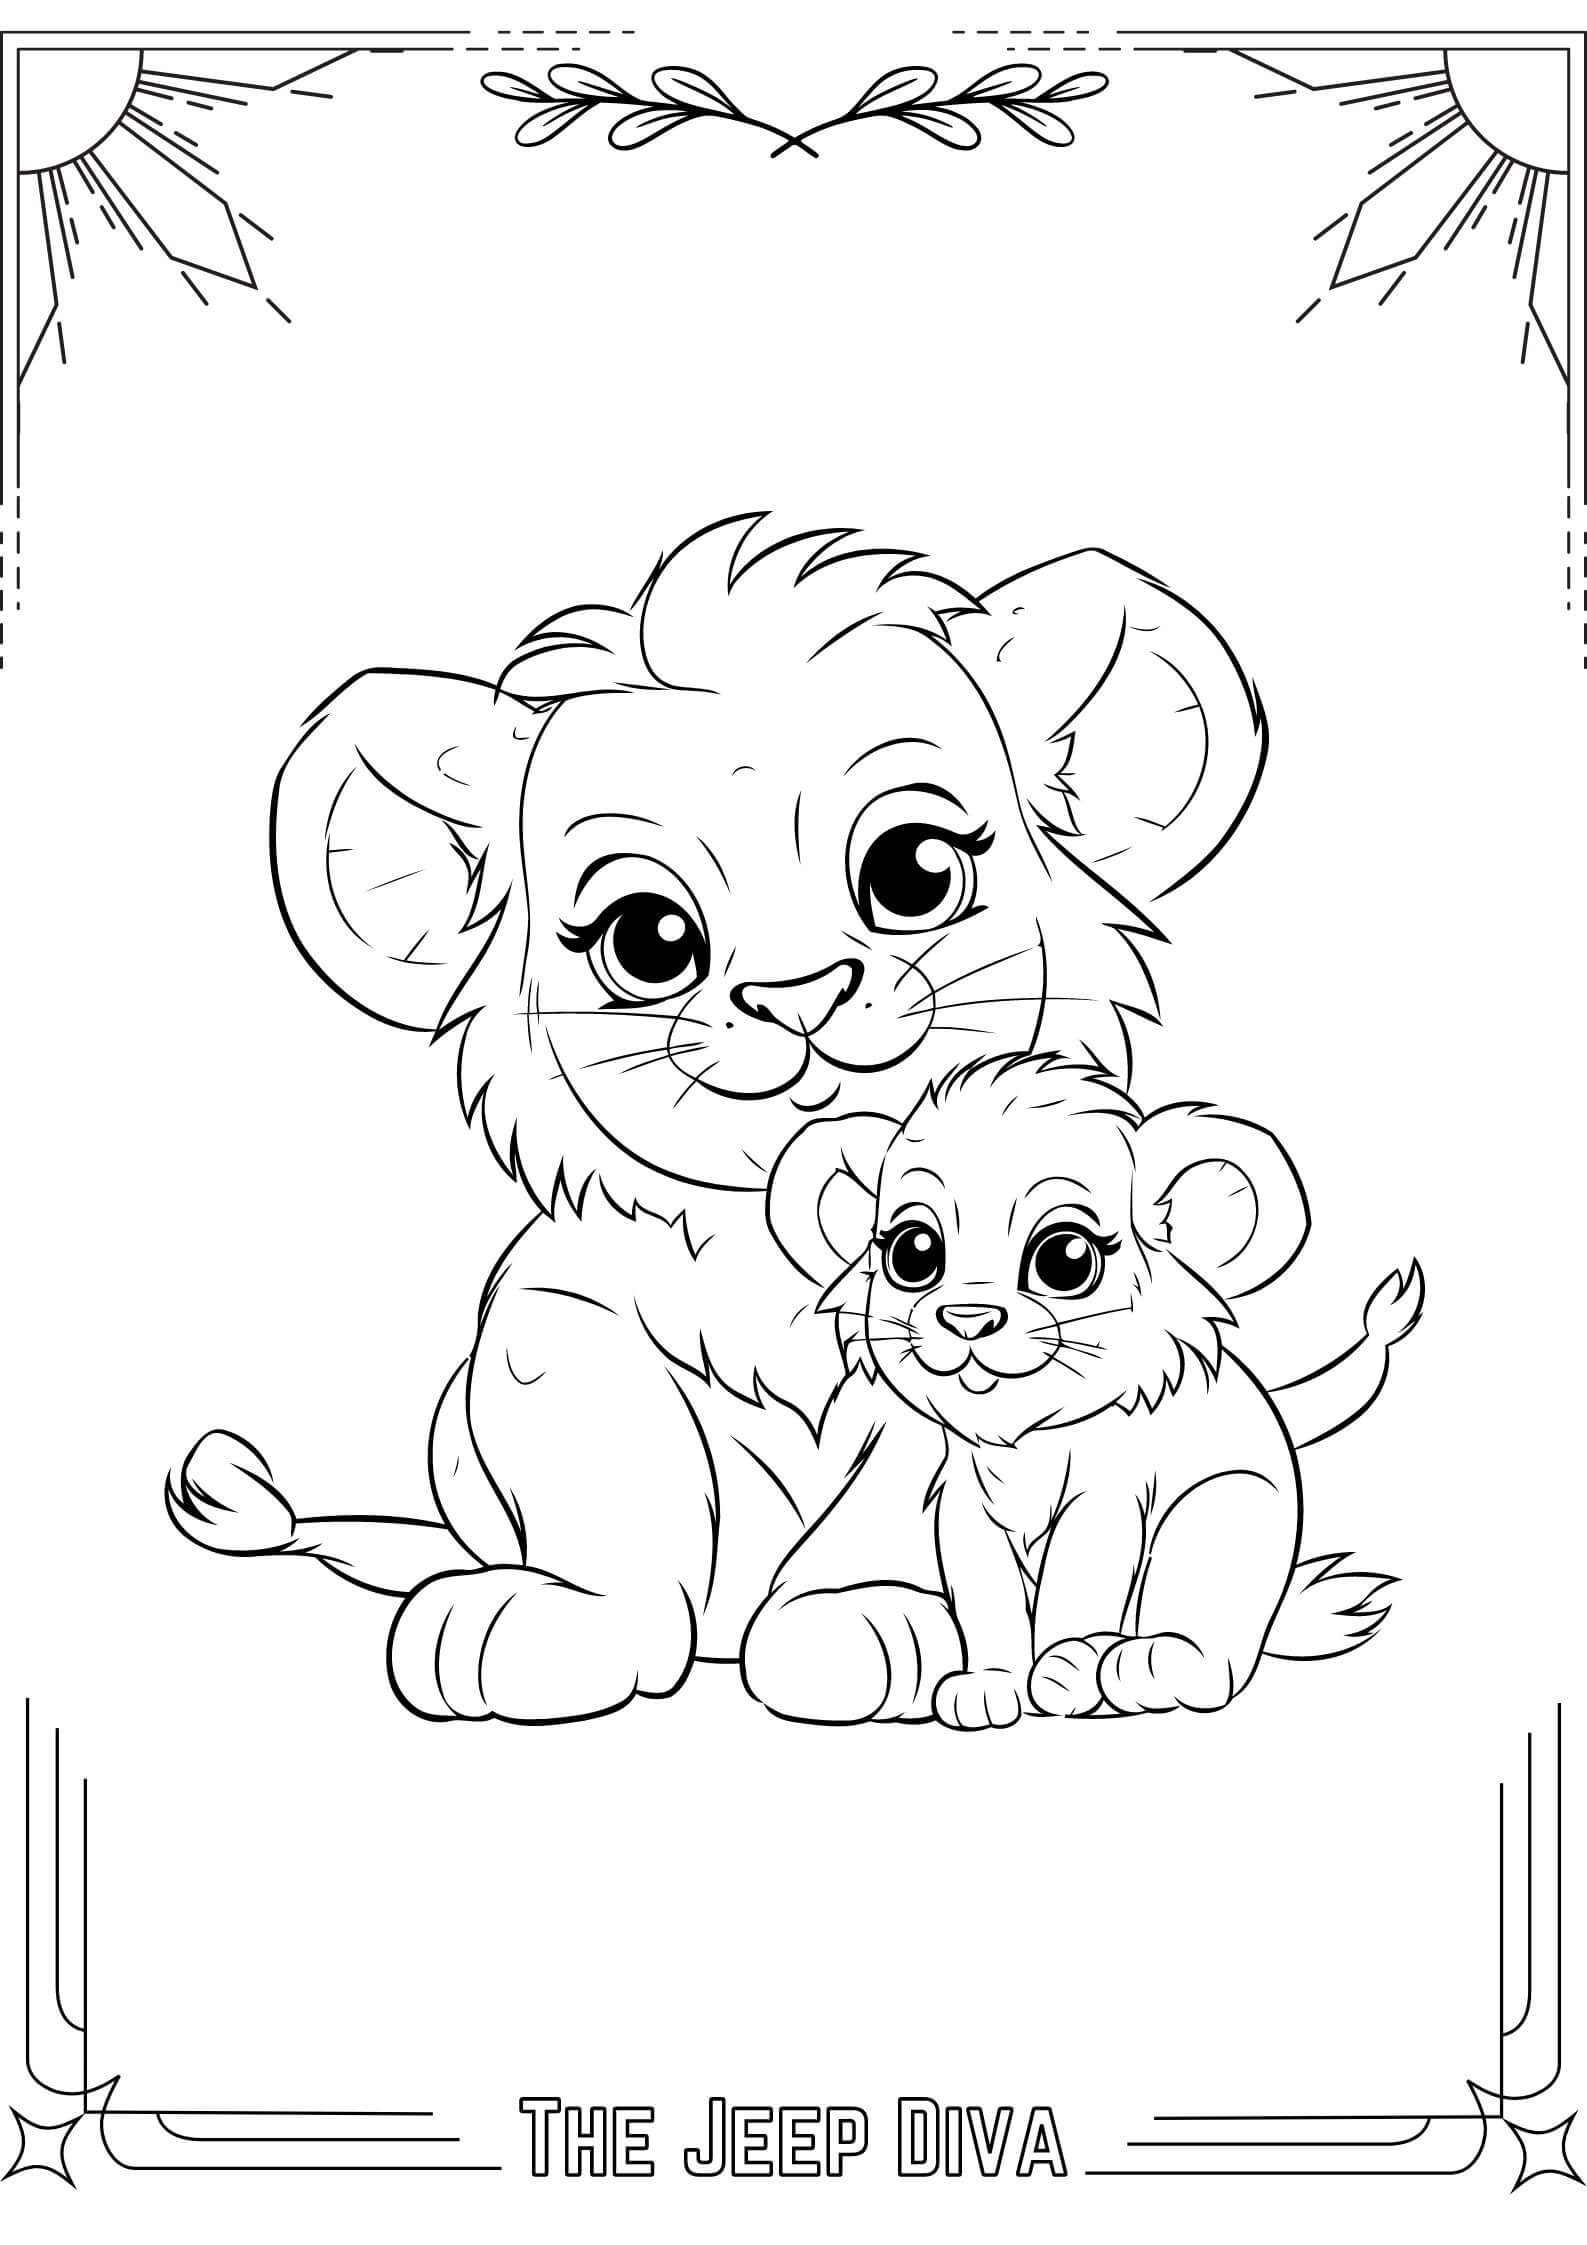 The Jeep Diva Coloring Page 10 Lion